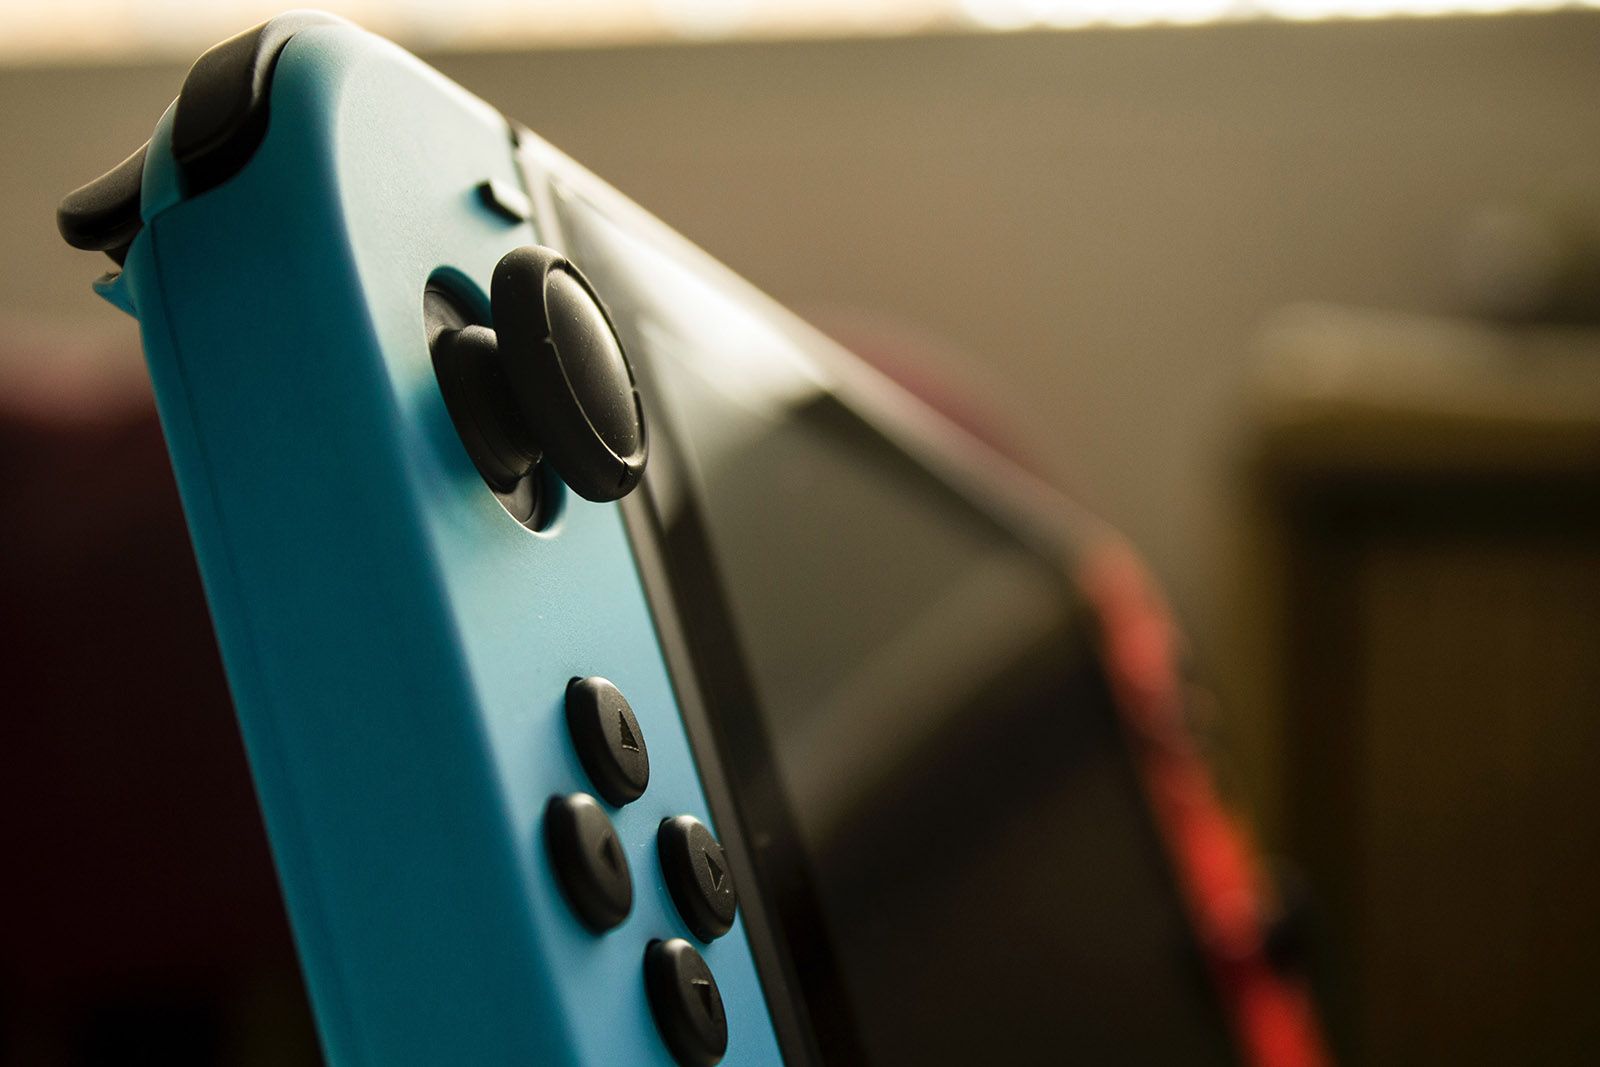 Nintendo Switch 2 specs, rumours and features